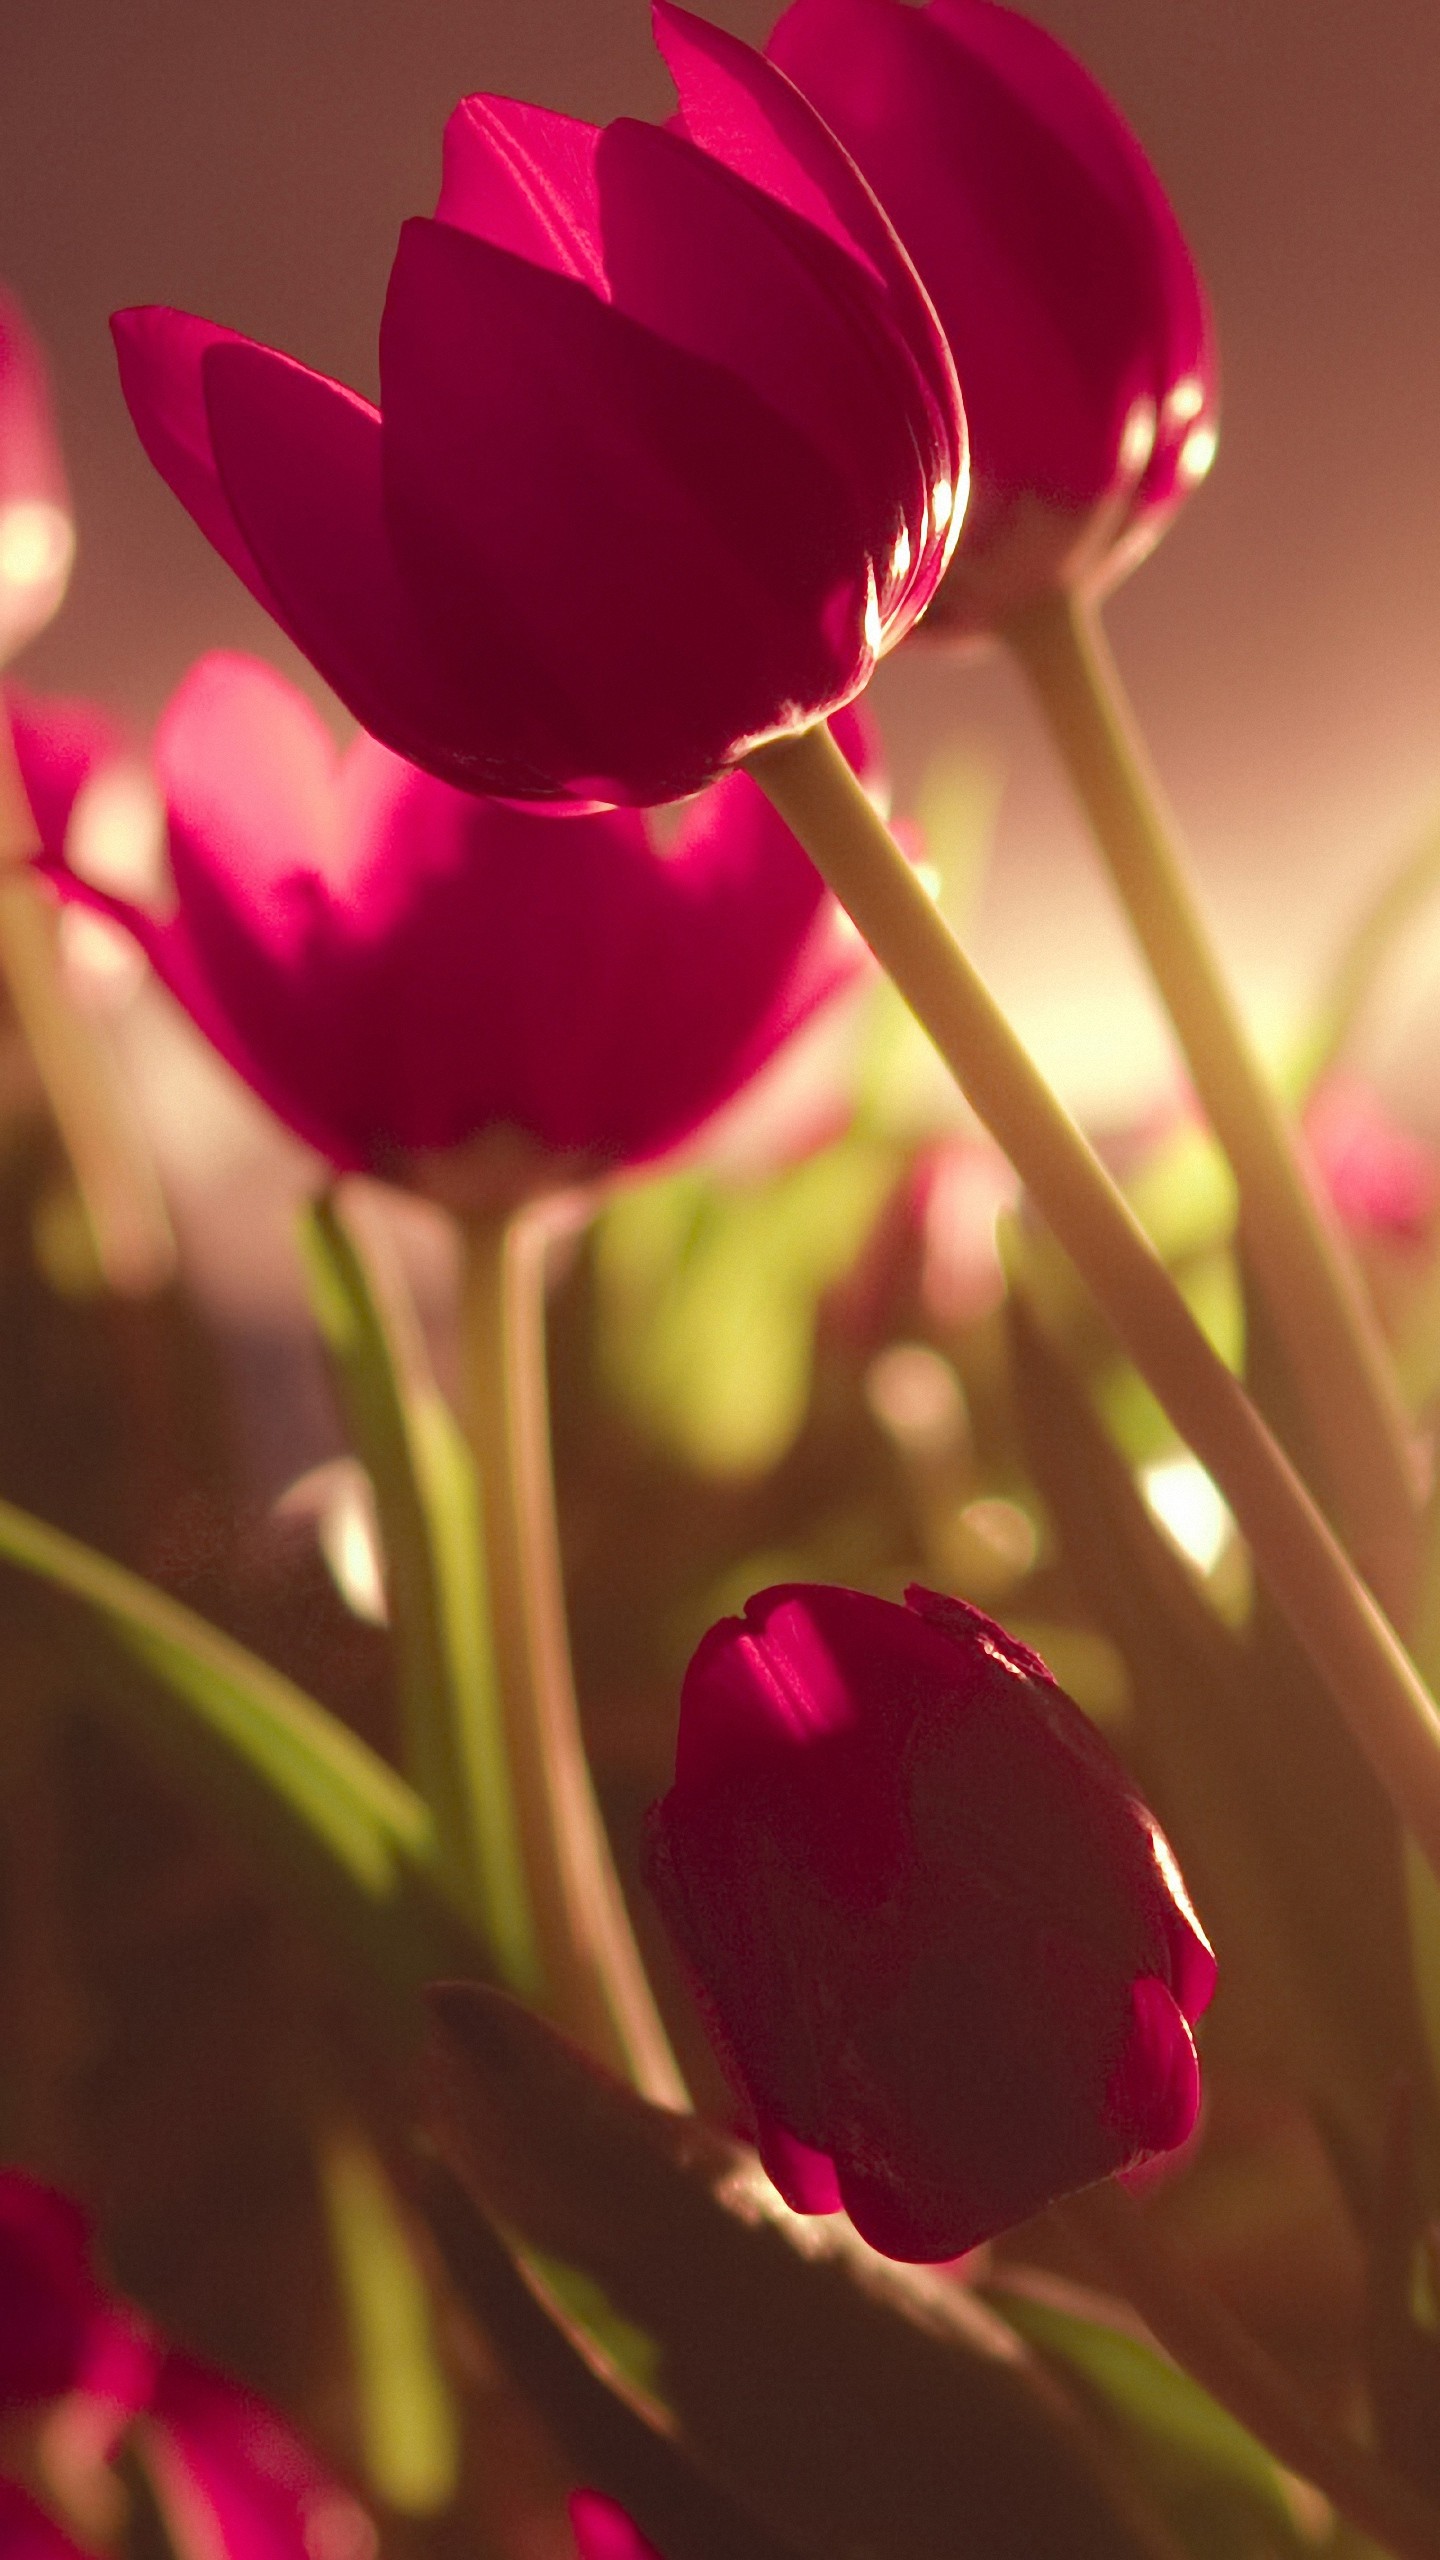 Mobile Beautiful Tulips sony xperia z4 Wallpapers HD 1440×2560